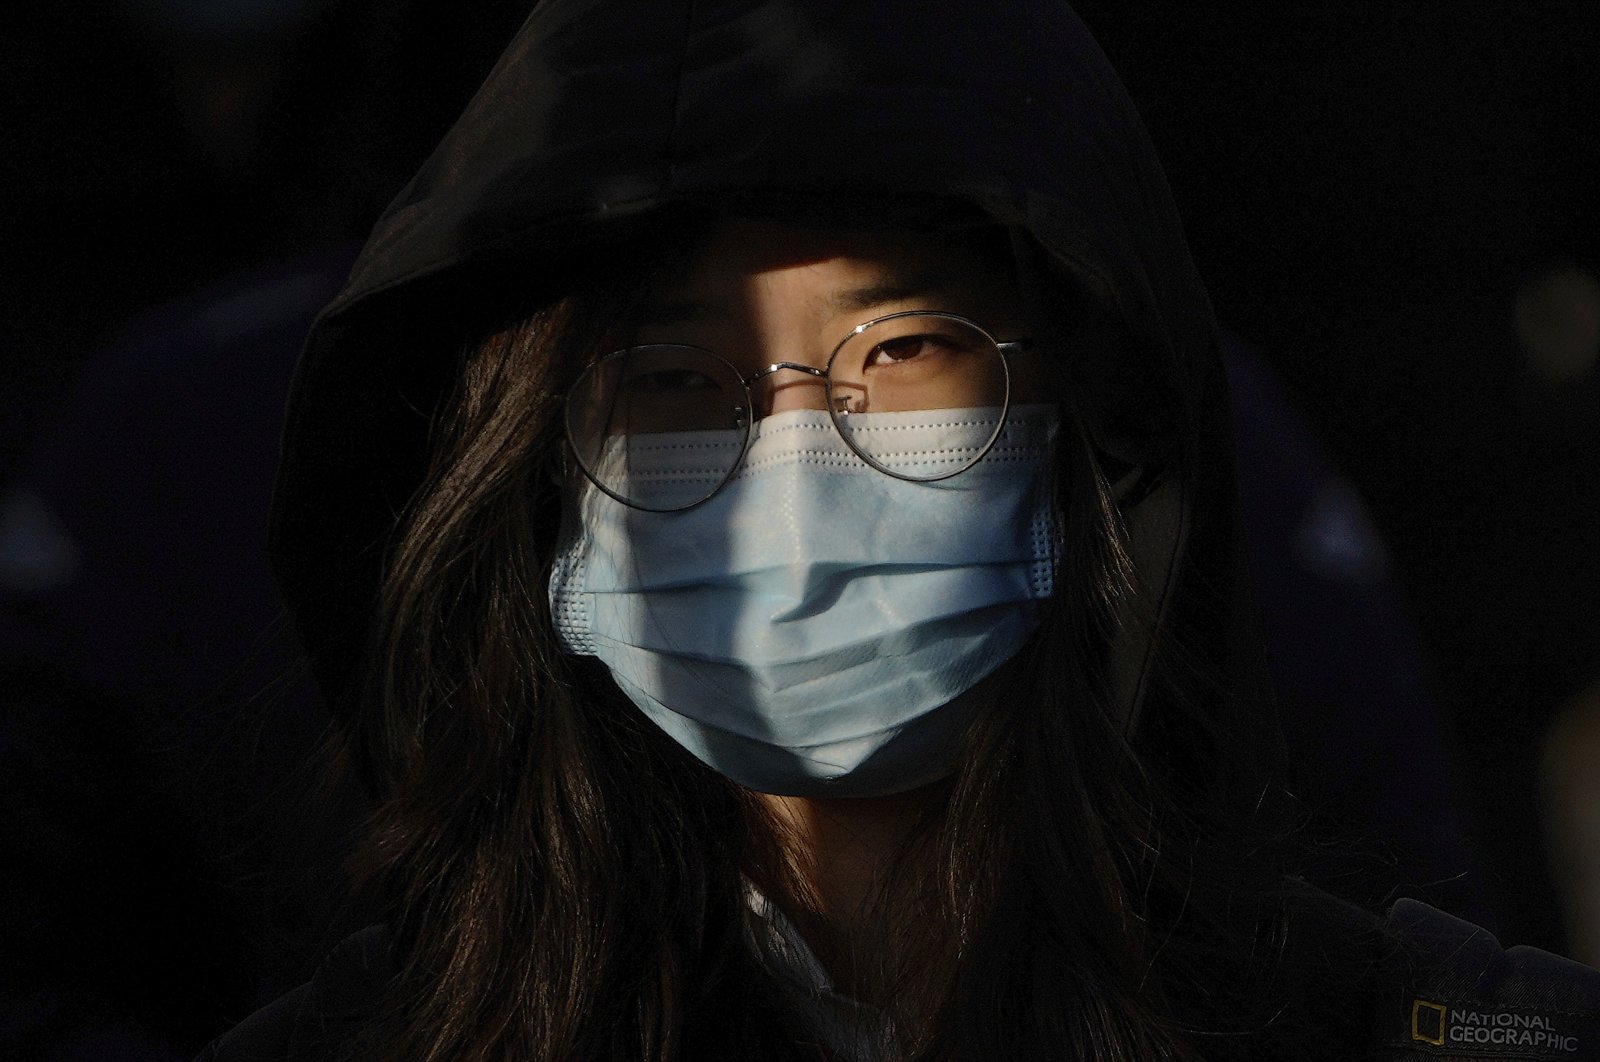 A woman wearing a face mask to protect from the coronavirus heads to work during the morning rush hour in Beijing, China, Jan. 10, 2022. (AP Photo)